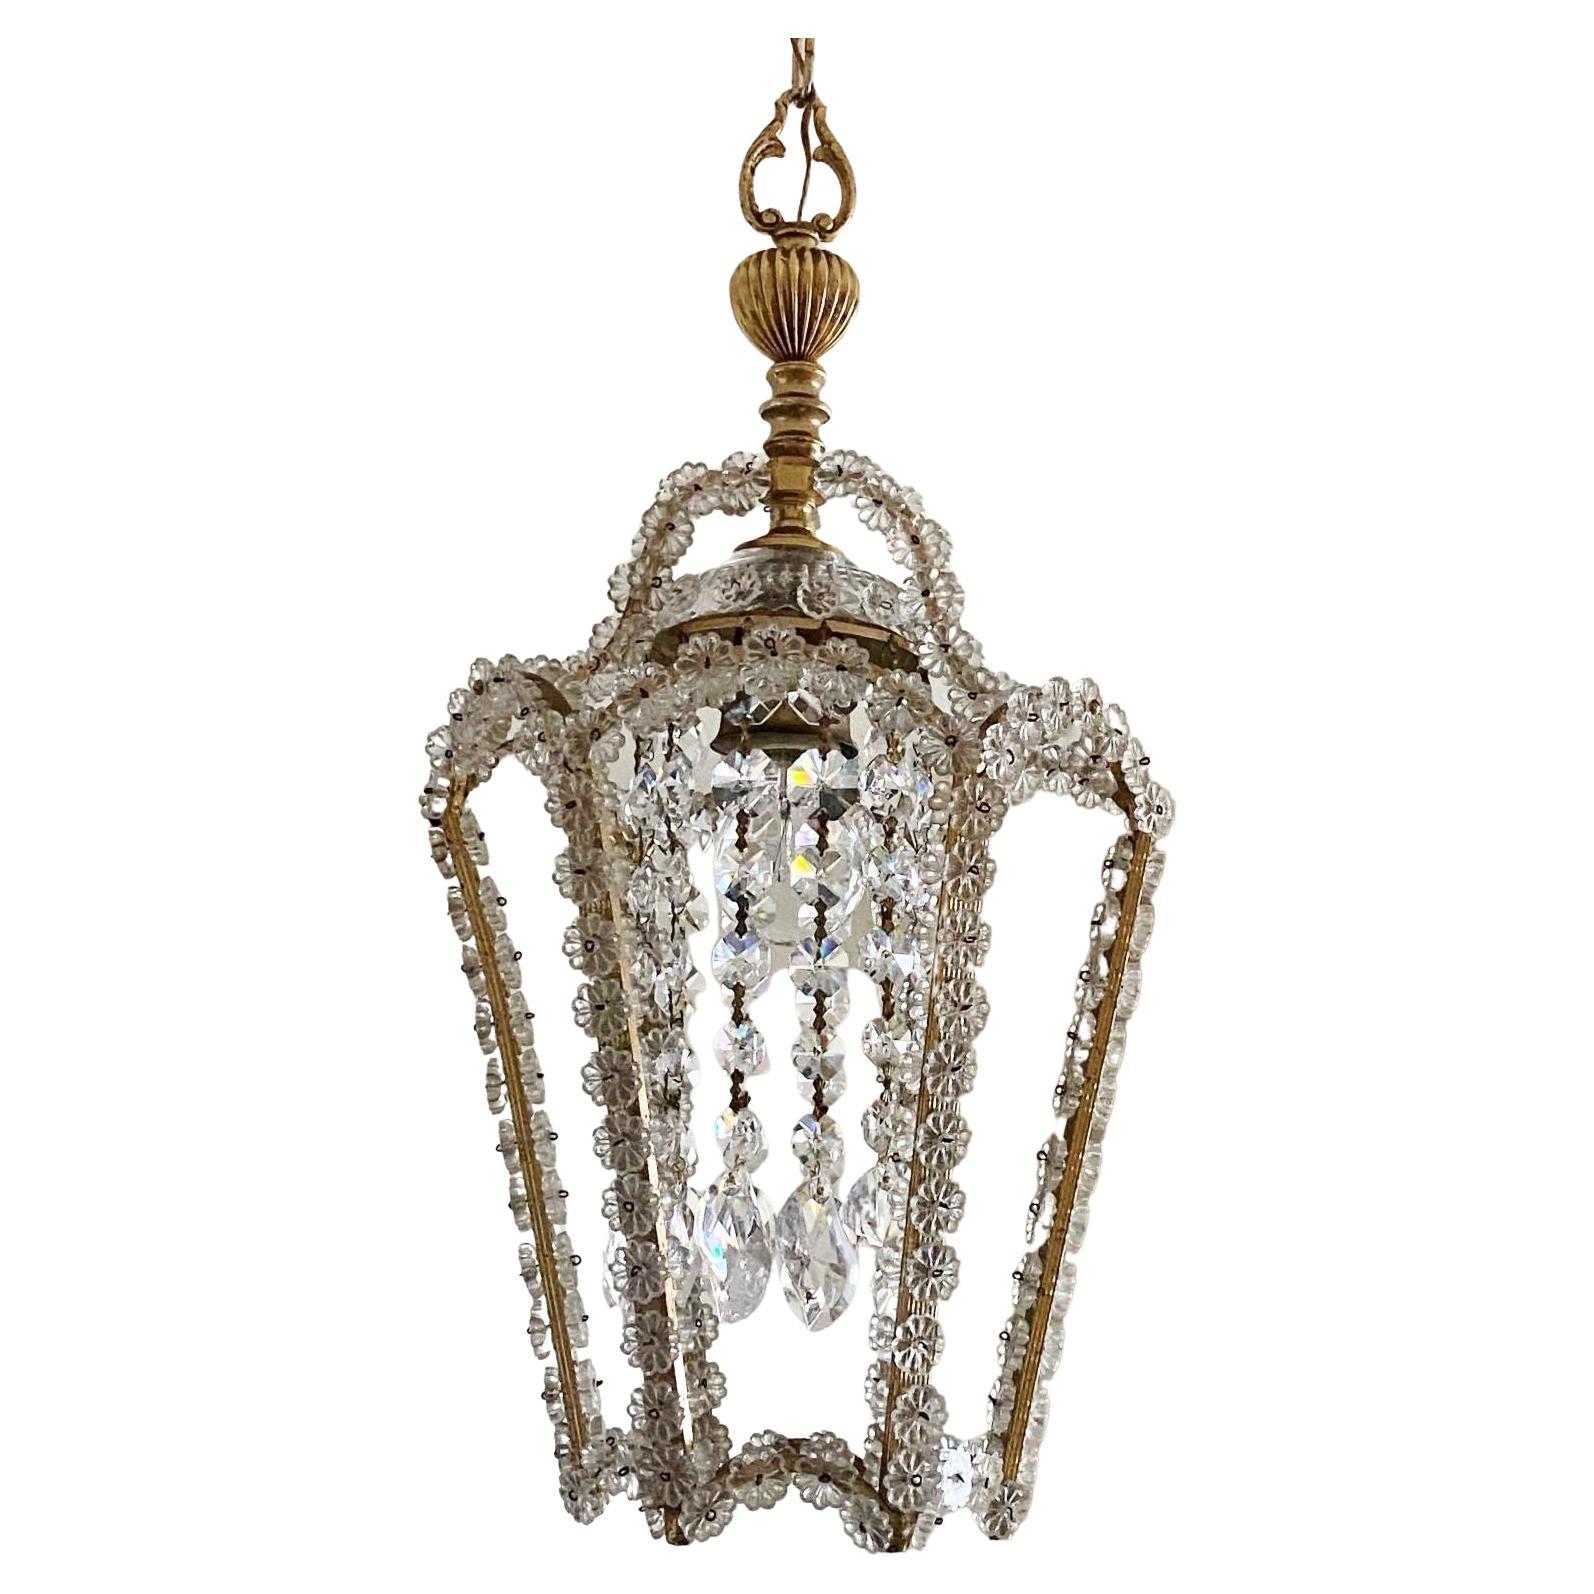 One of Kind French Art Deco Handcrafted Crystal Brass Hexagonal Lantern, 1930s